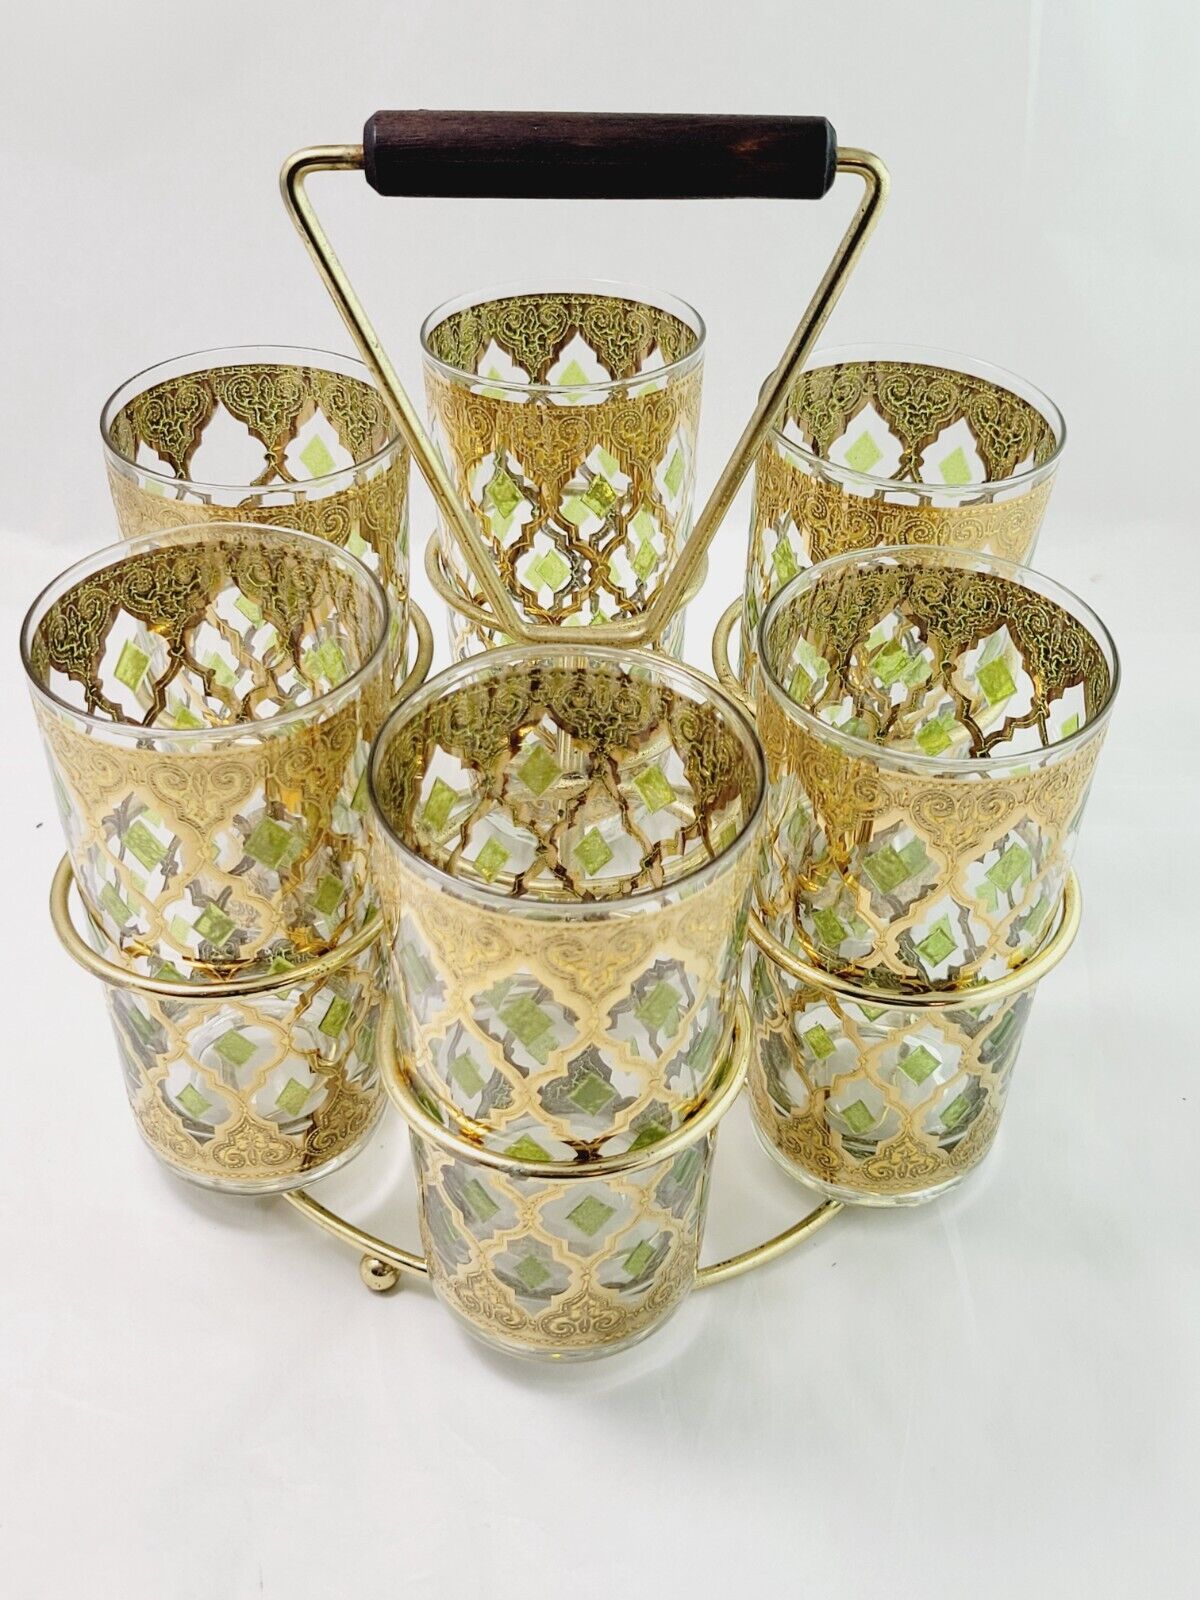 22K Gold Culver Signed Valencia Set of 6 Highball Glasses with Caddy